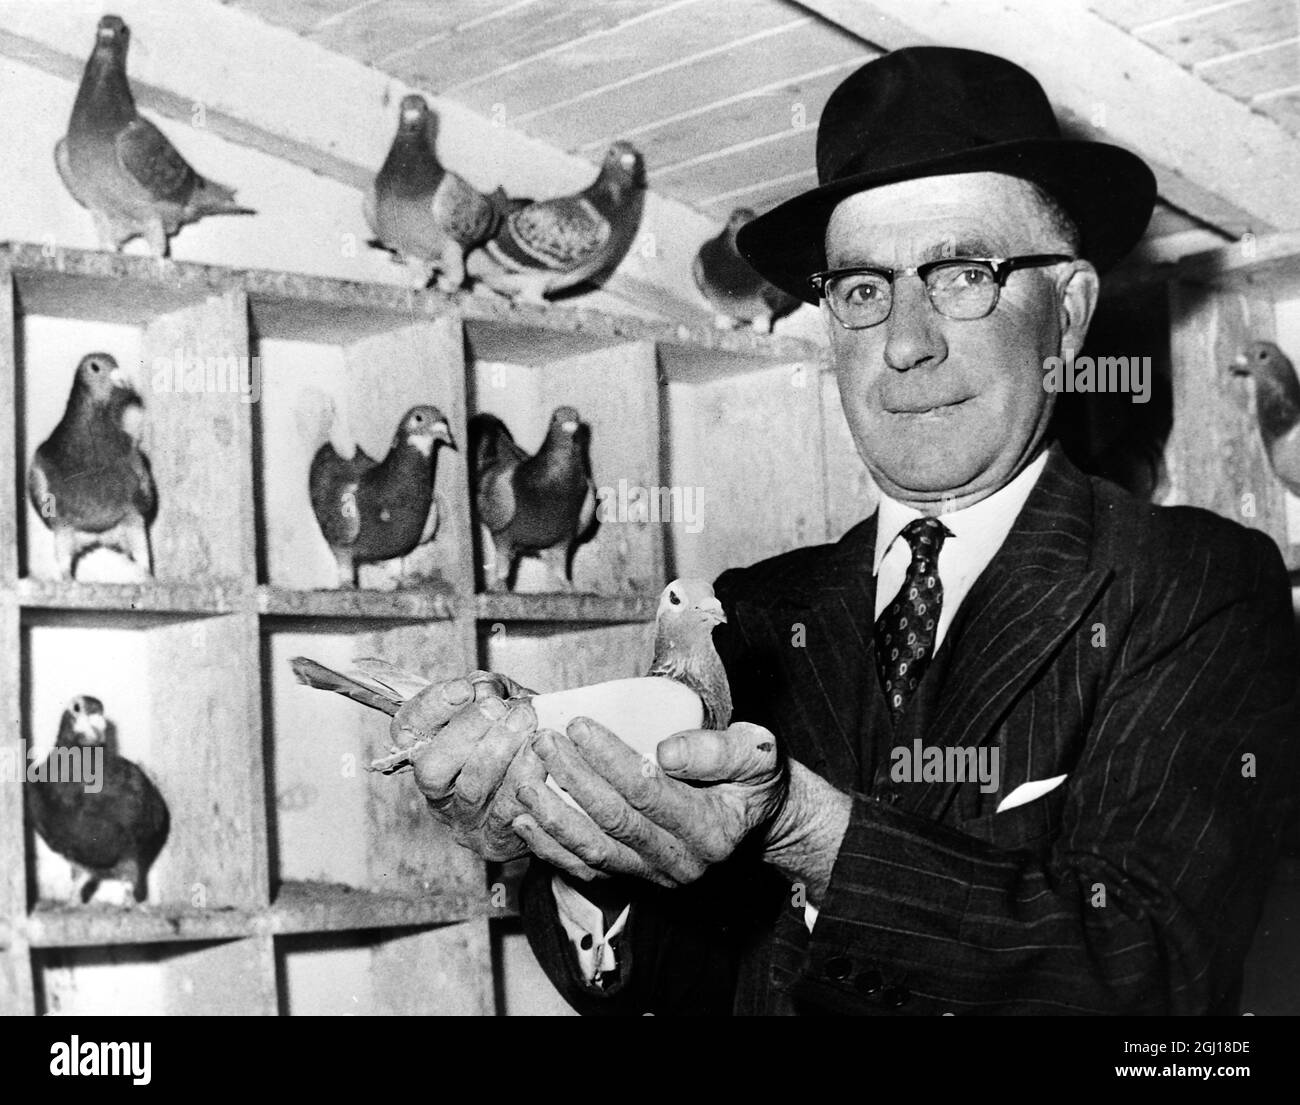 16 NOVEMBER 1963 MR LEN RUSH, MANAGER OF THE ROYAL LOFTS, HOLDS ONE OF QUEEN ELIZABETH'S PRIZE RACING PIGEONS. KINGS LYNN, NORFOLK, ENGLAND. Stock Photo